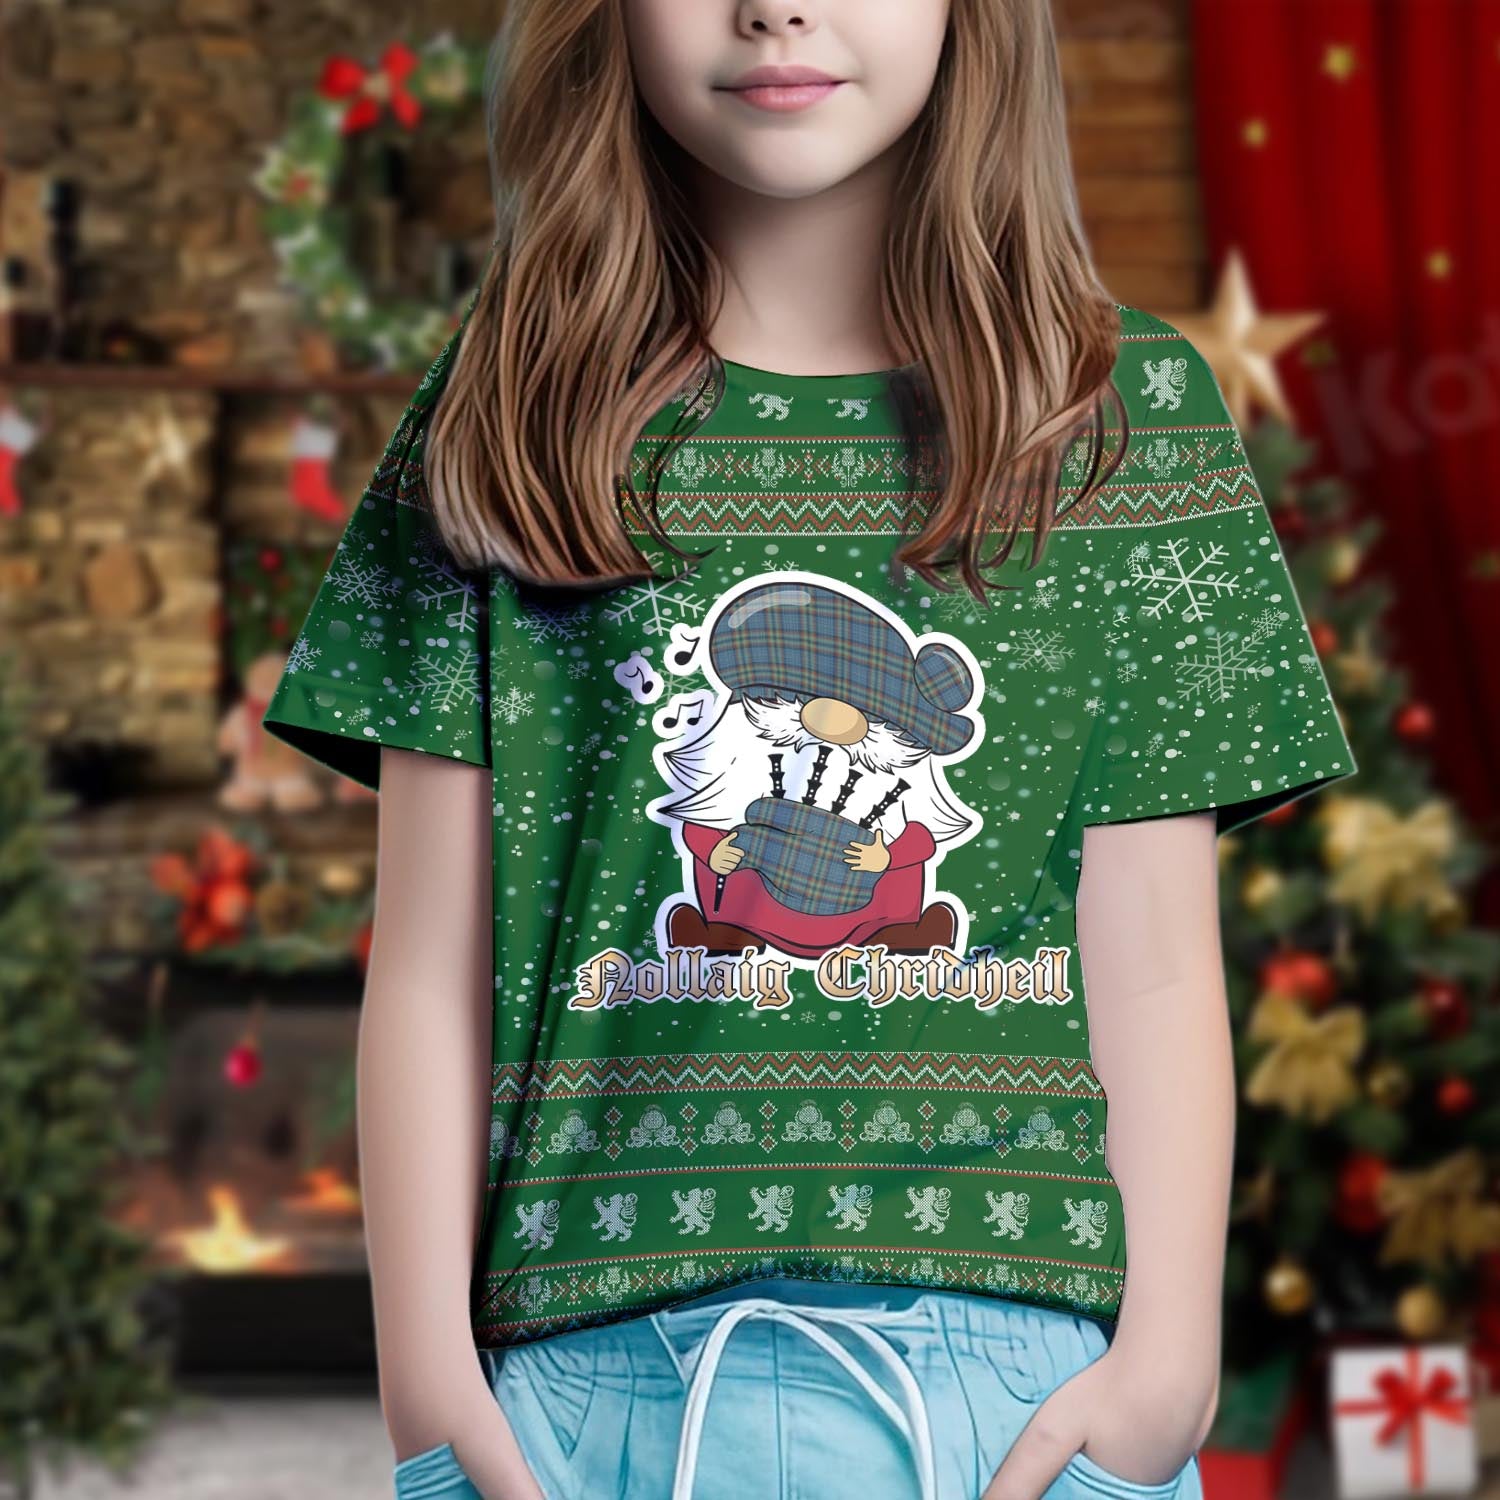 Ralston UK Clan Christmas Family T-Shirt with Funny Gnome Playing Bagpipes Kid's Shirt Green - Tartanvibesclothing